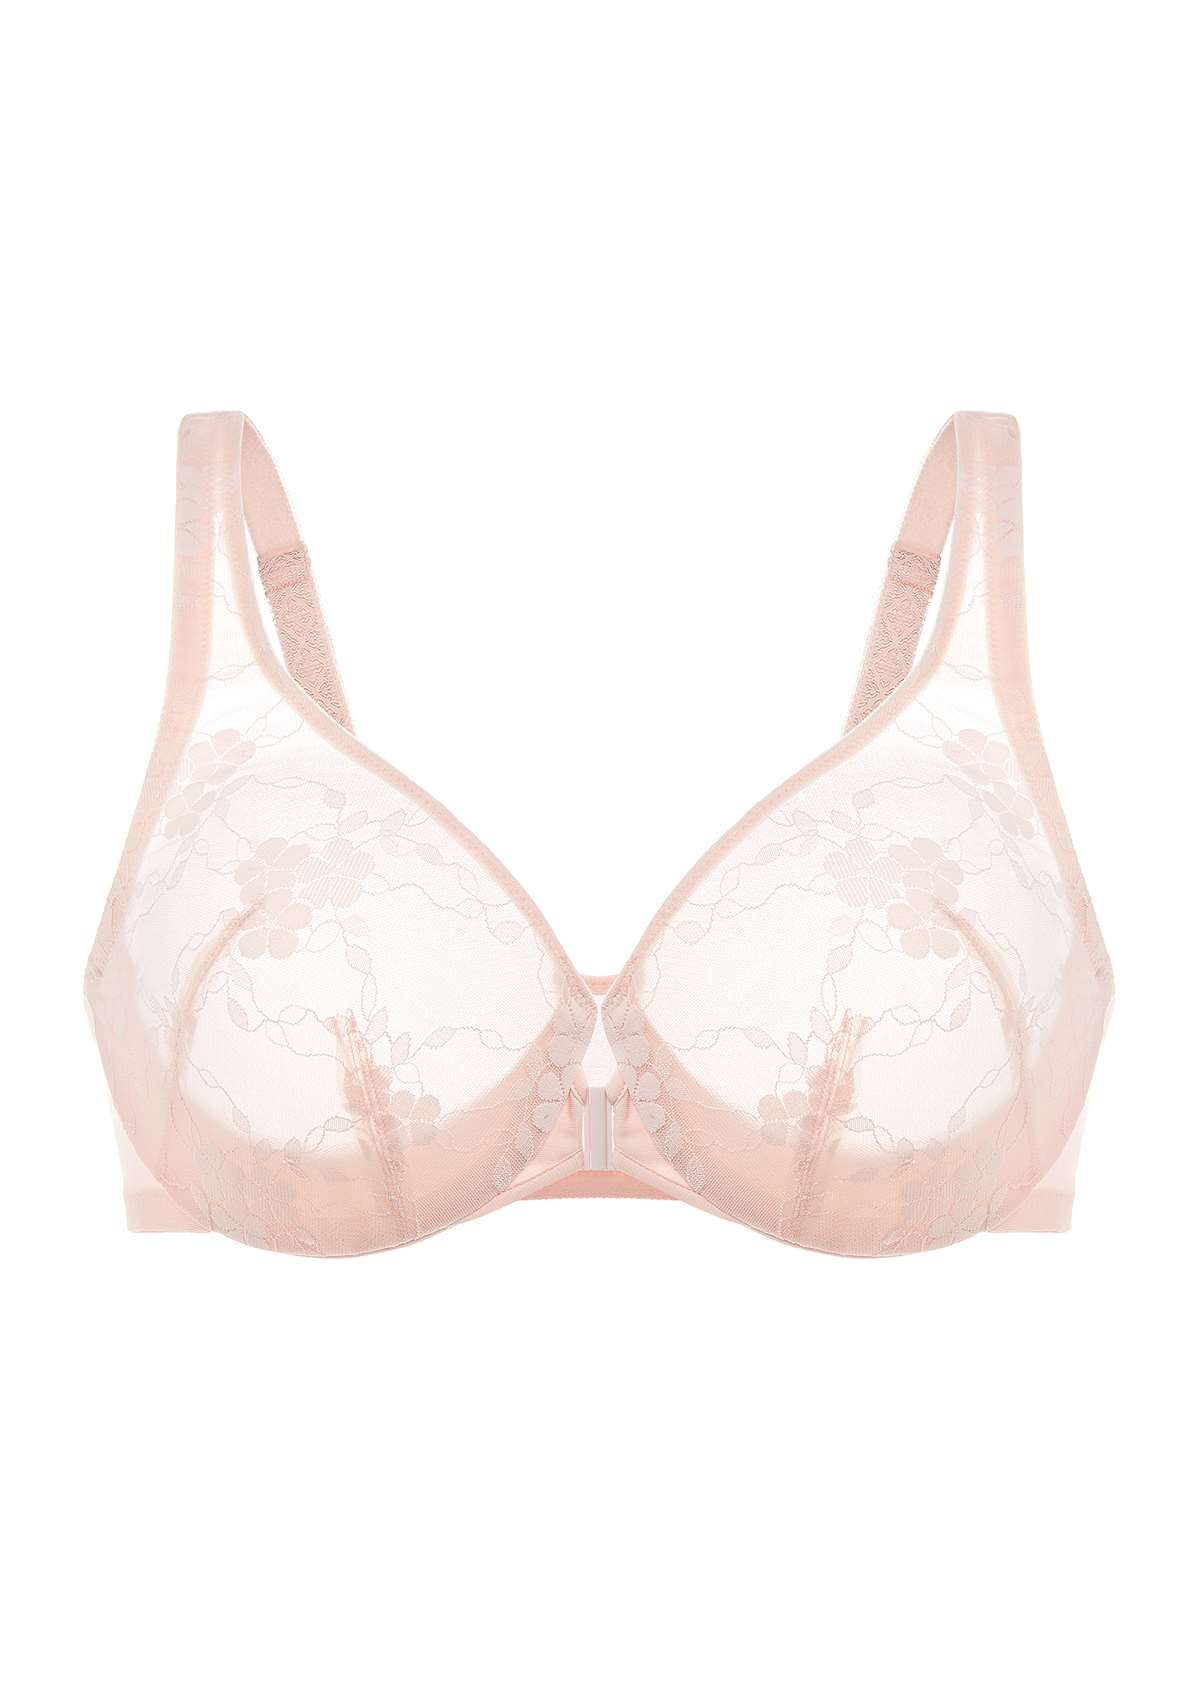 HSIA Spring Romance Front-Close Floral Lace Unlined Full Coverage Bra - Dusty Peach / 34 / DD/E